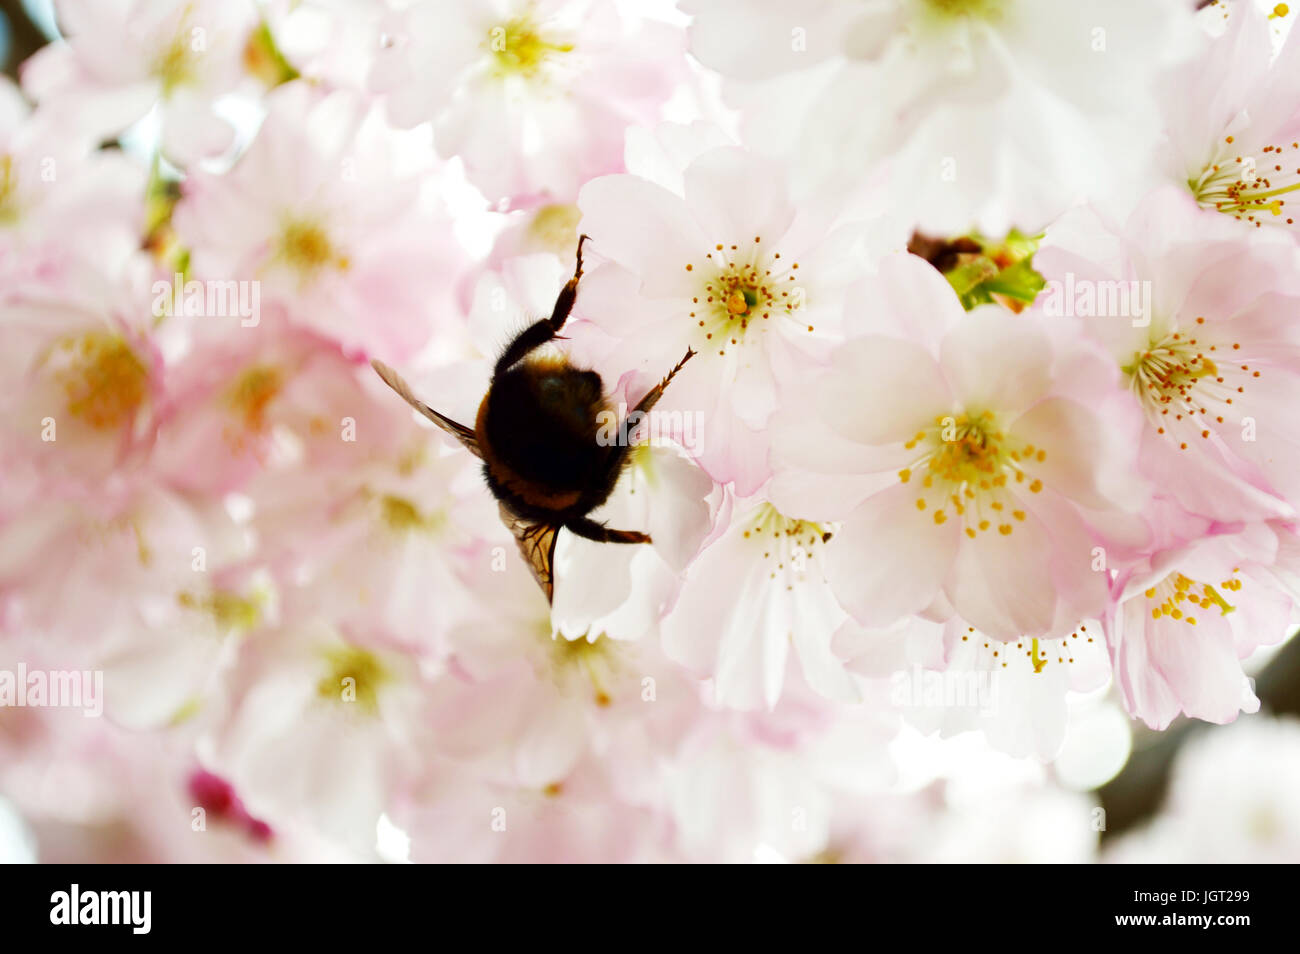 Close up of a bumble bee (Bombus terrestris) collecting pollen from pink cherry blossoms Stock Photo